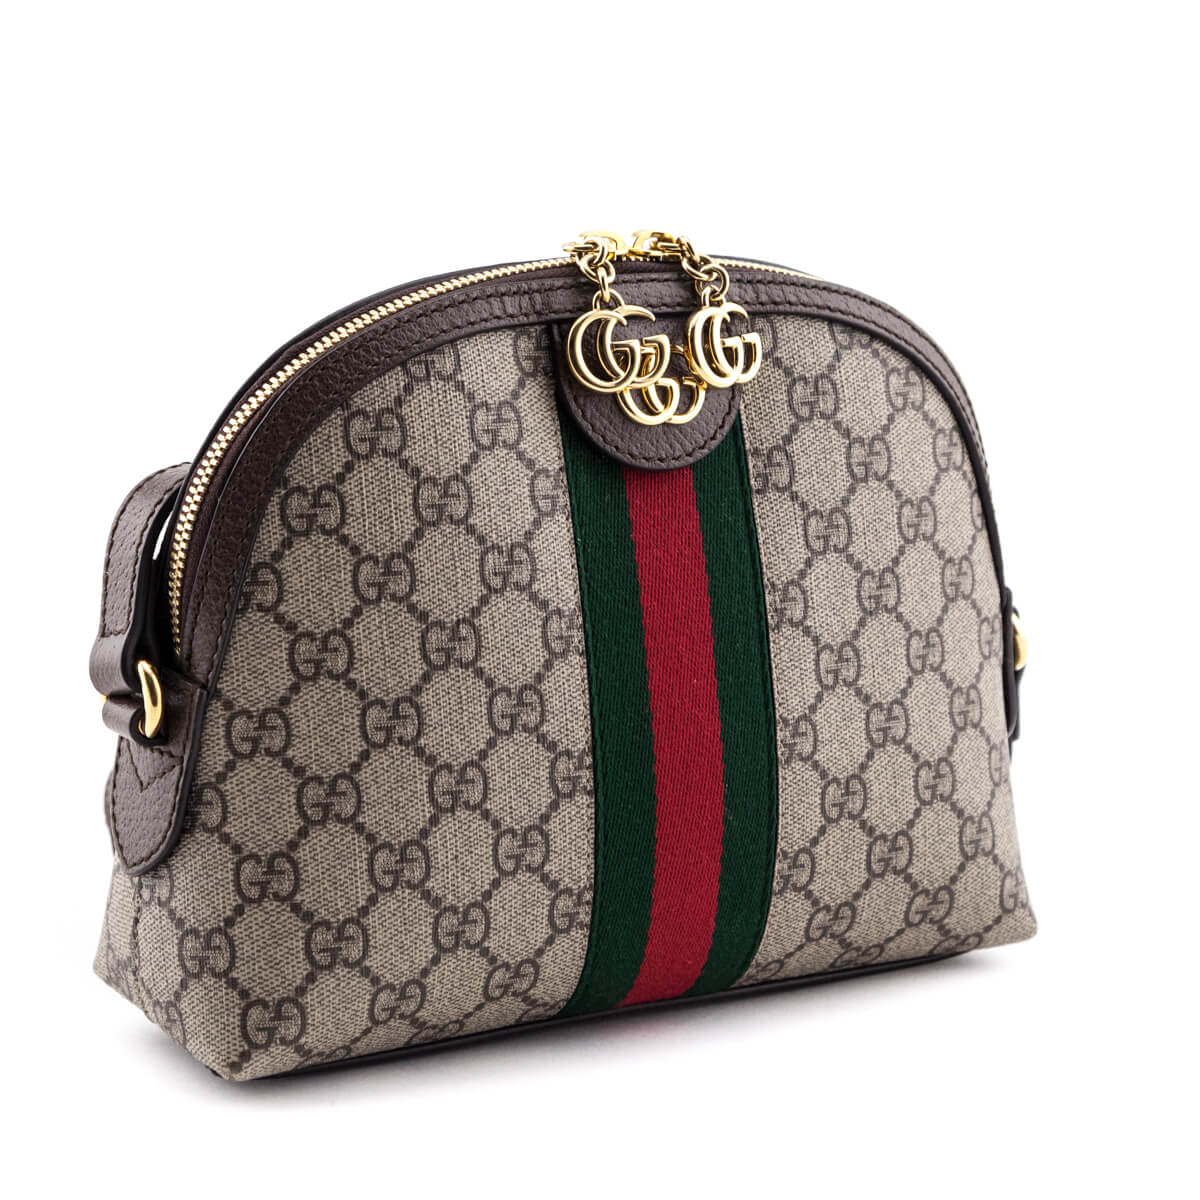 Gucci Beige GG Supreme Small Ophidia GG Shoulder Bag - Love that Bag etc - Preowned Authentic Designer Handbags & Preloved Fashions